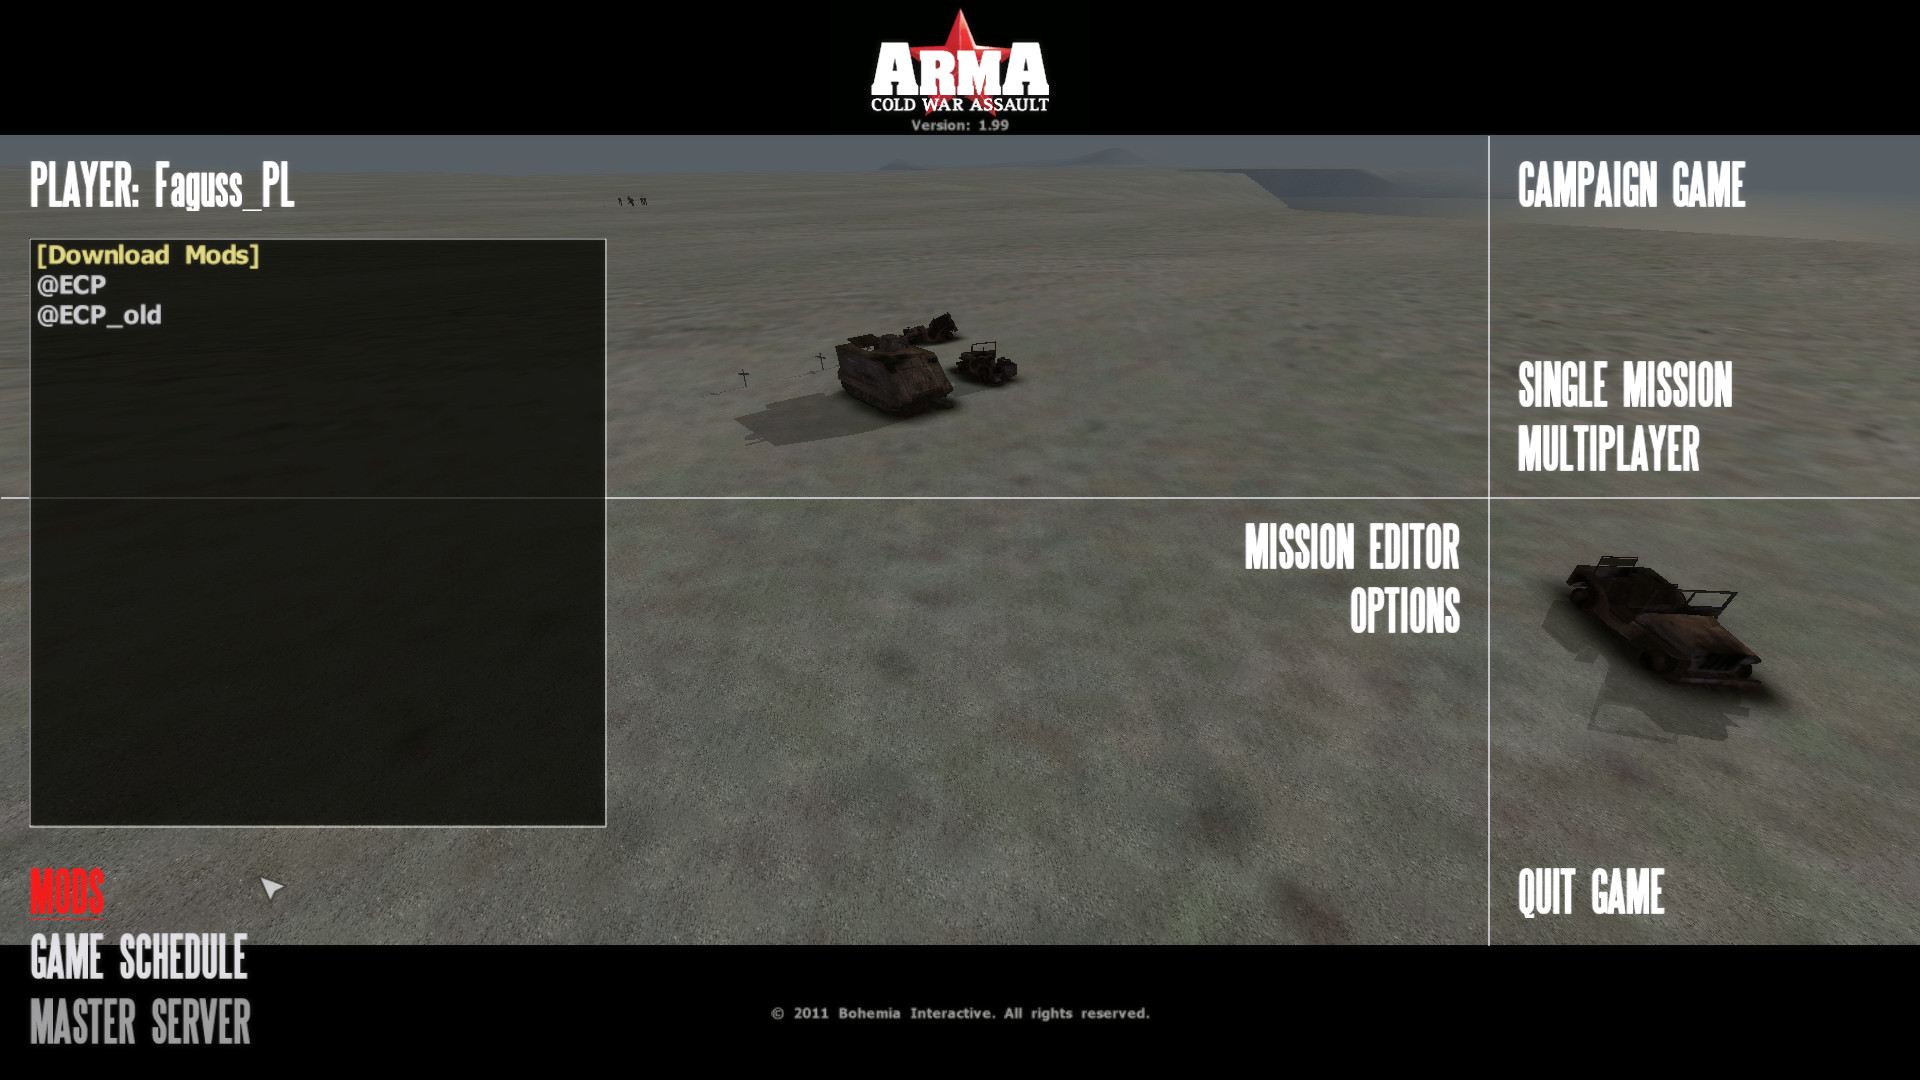 Arma 3 - How to automatically download and install mods 